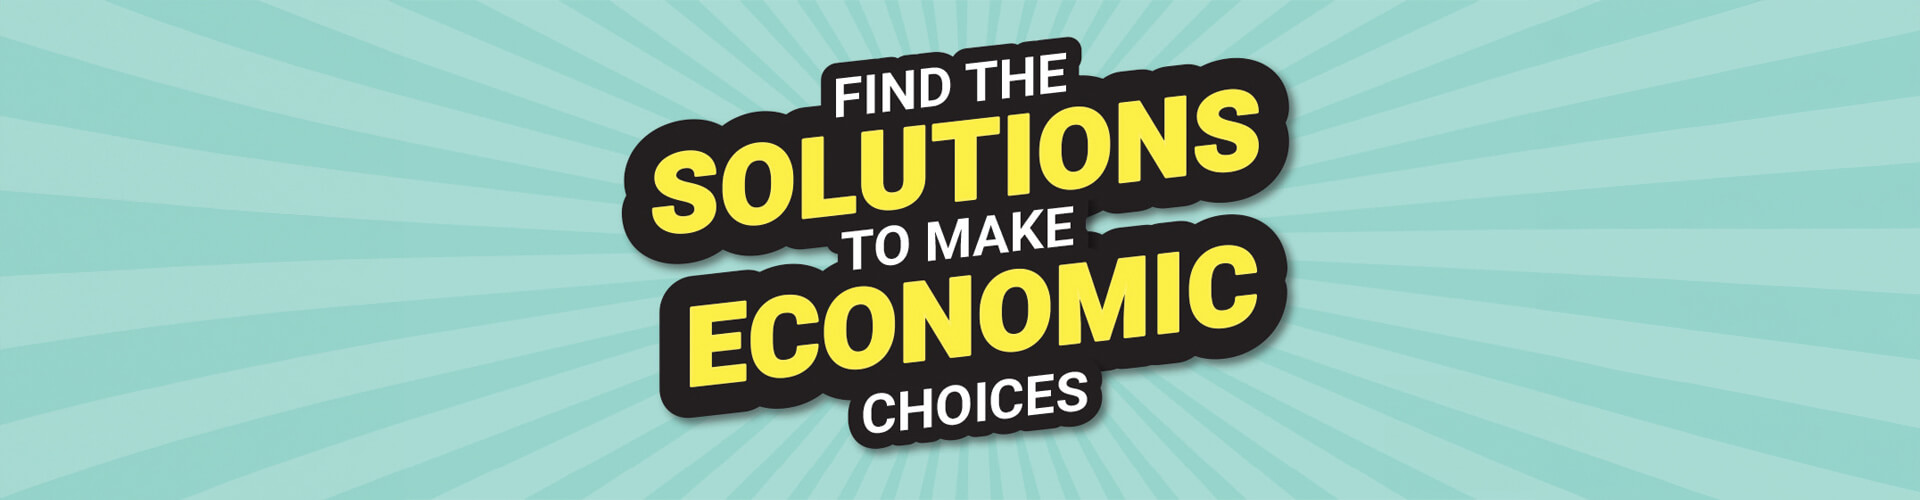 Find the solution to make economic choices.